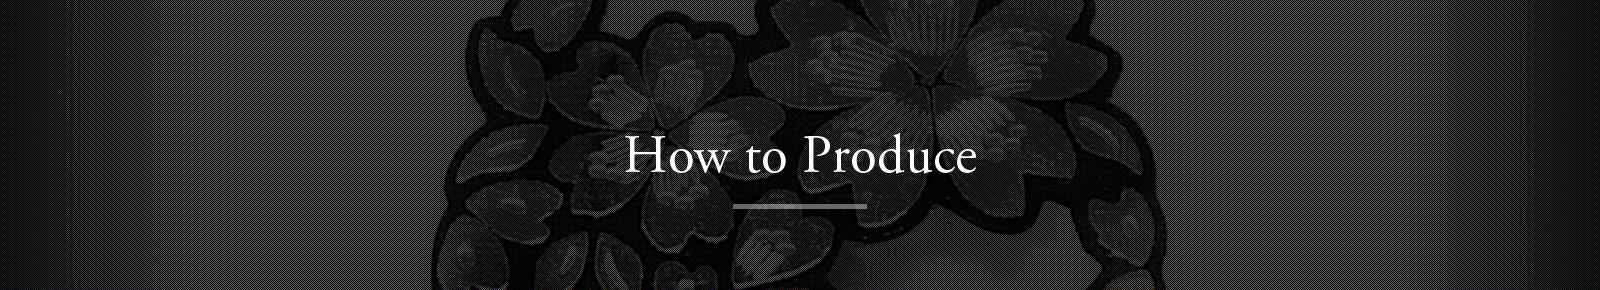 How to Produce